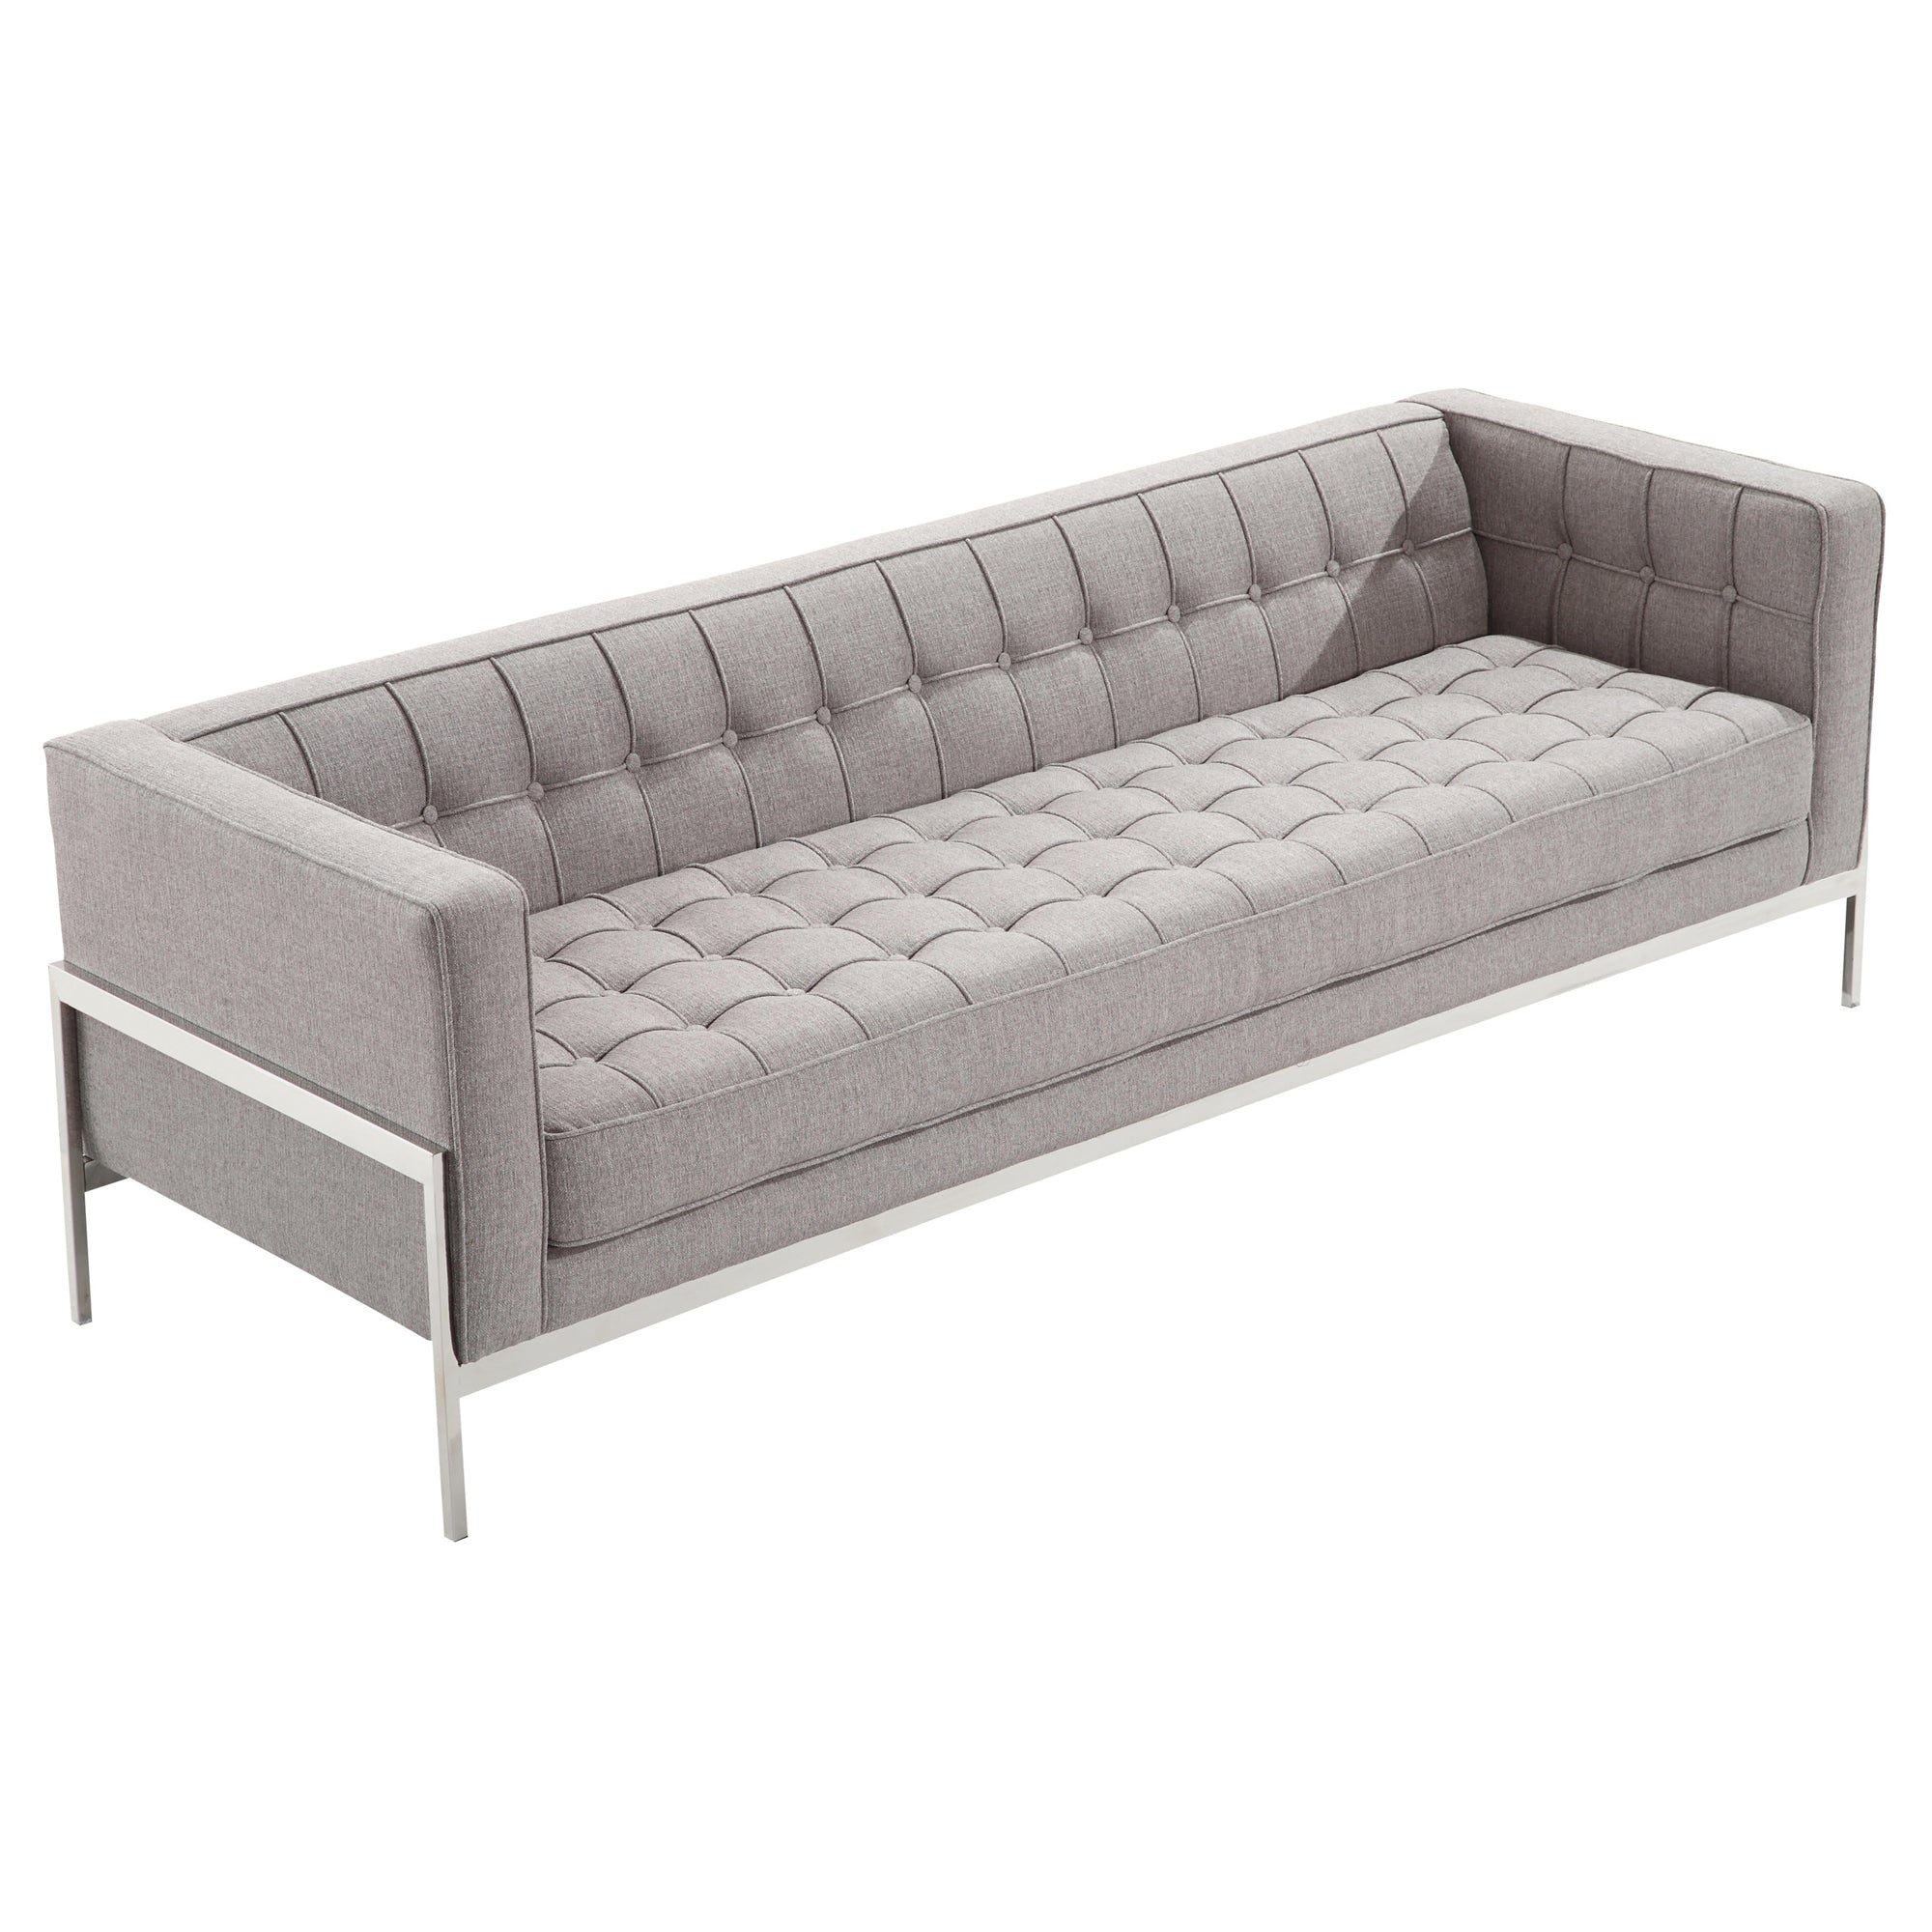 Armen Living Lcan3gr Andre Contemporary Sofa In Gray Tweed And Stainless Steel